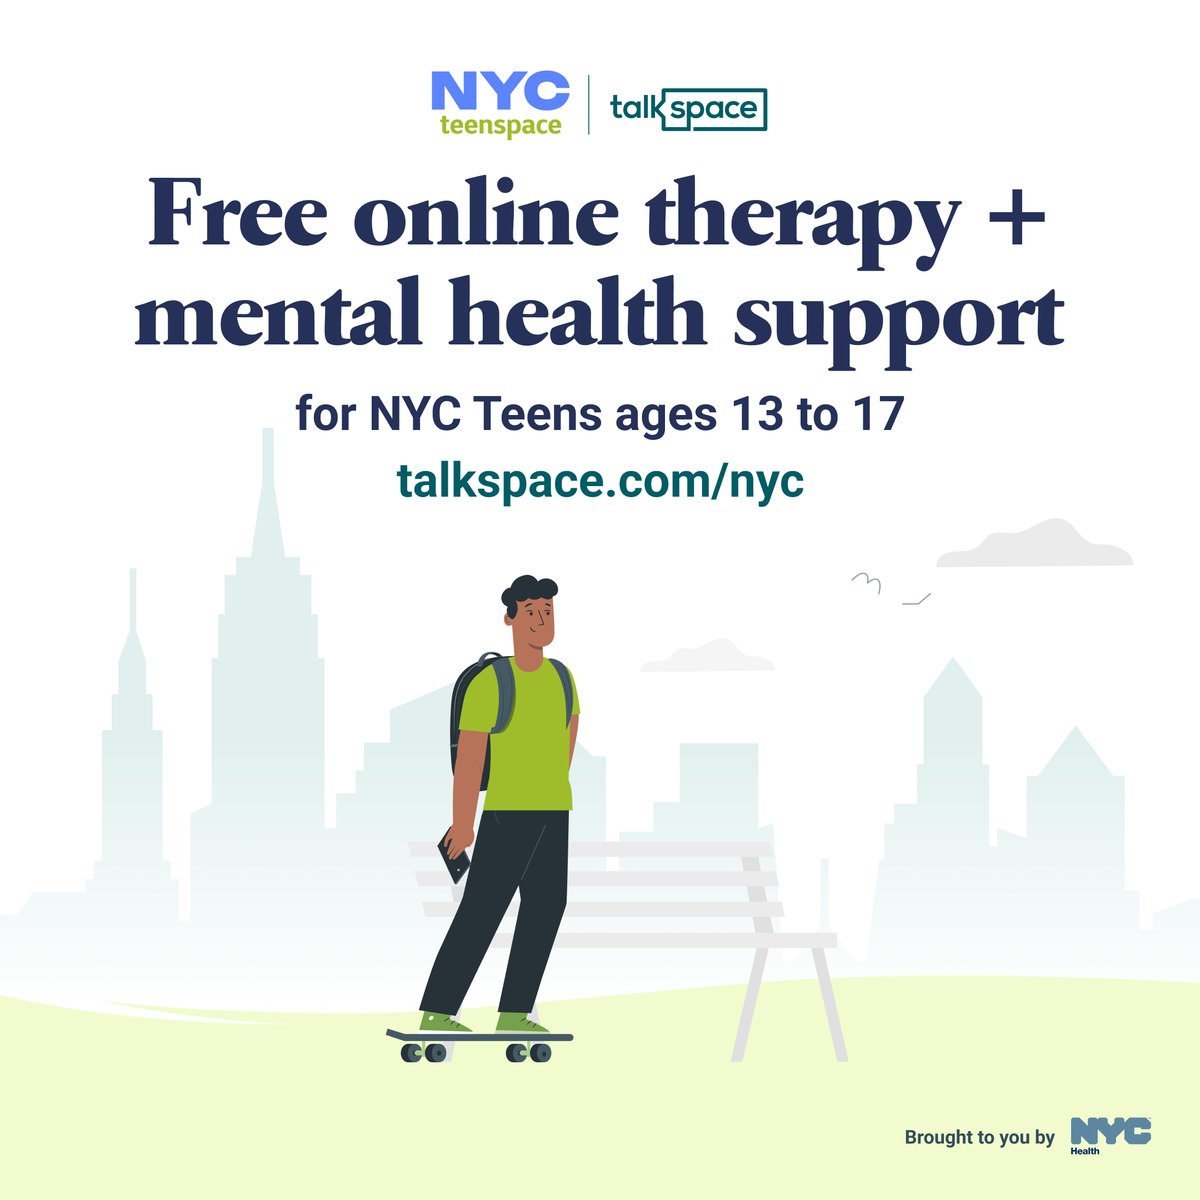 May is #MentalHealthMonth and we're reminding NYC teens: Whether you struggle with mental health challenges or just want somebody to talk to about your everyday ups and downs, free online therapy is available through NYC Teenspace. Sign up: nyc.gov/teenspace @talkspace